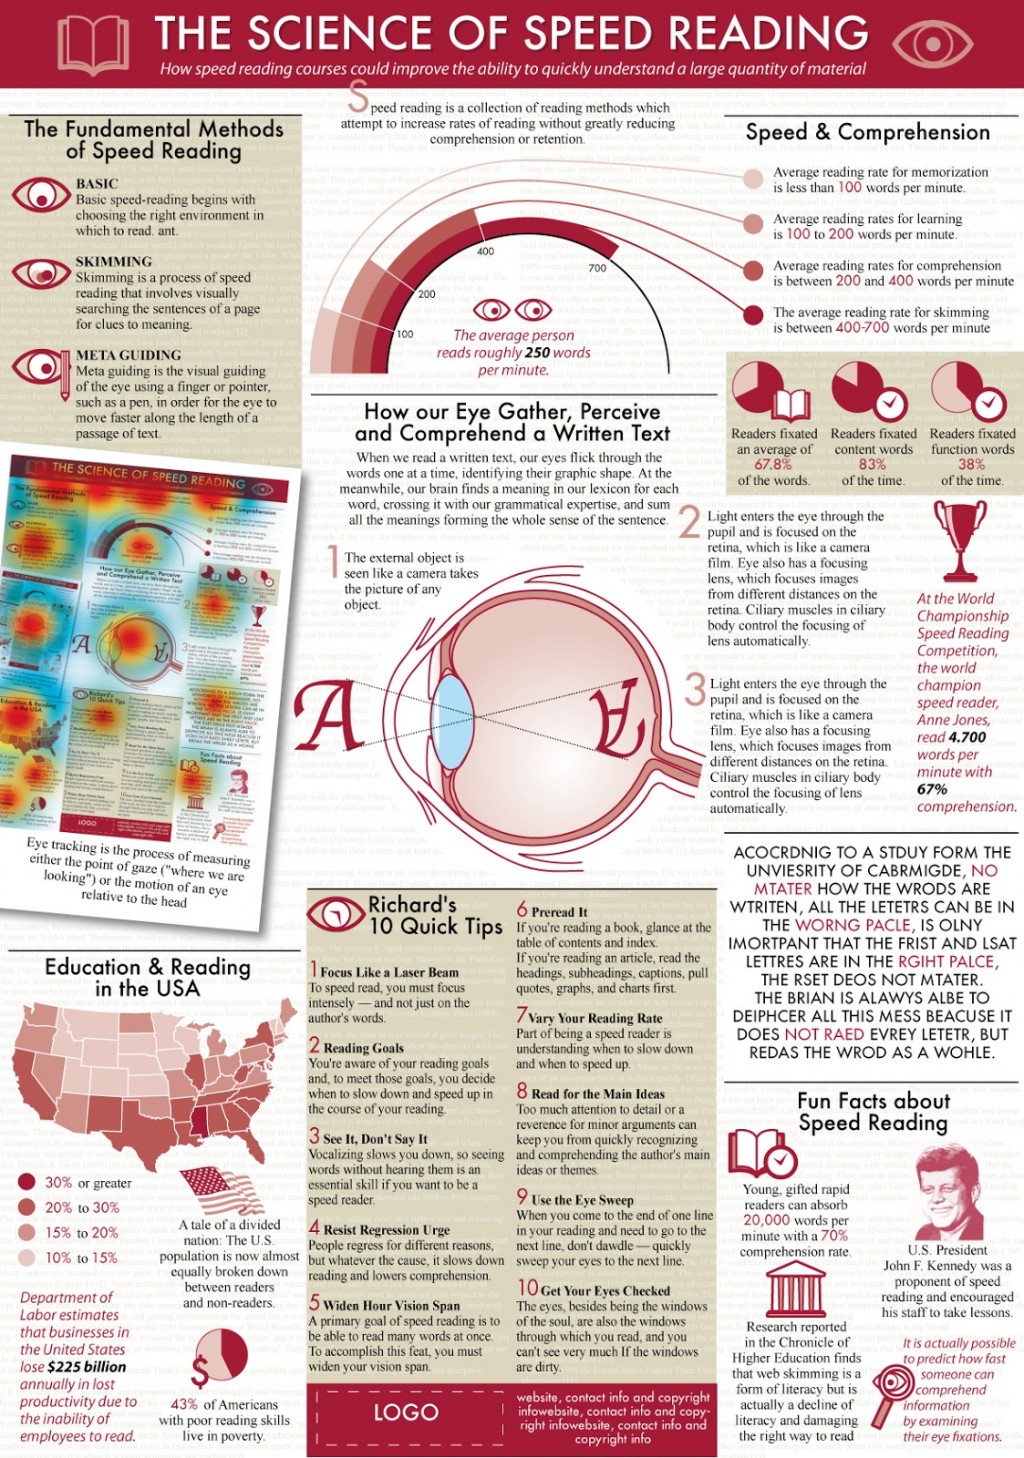 The-science-of-speed-reading-infographic1